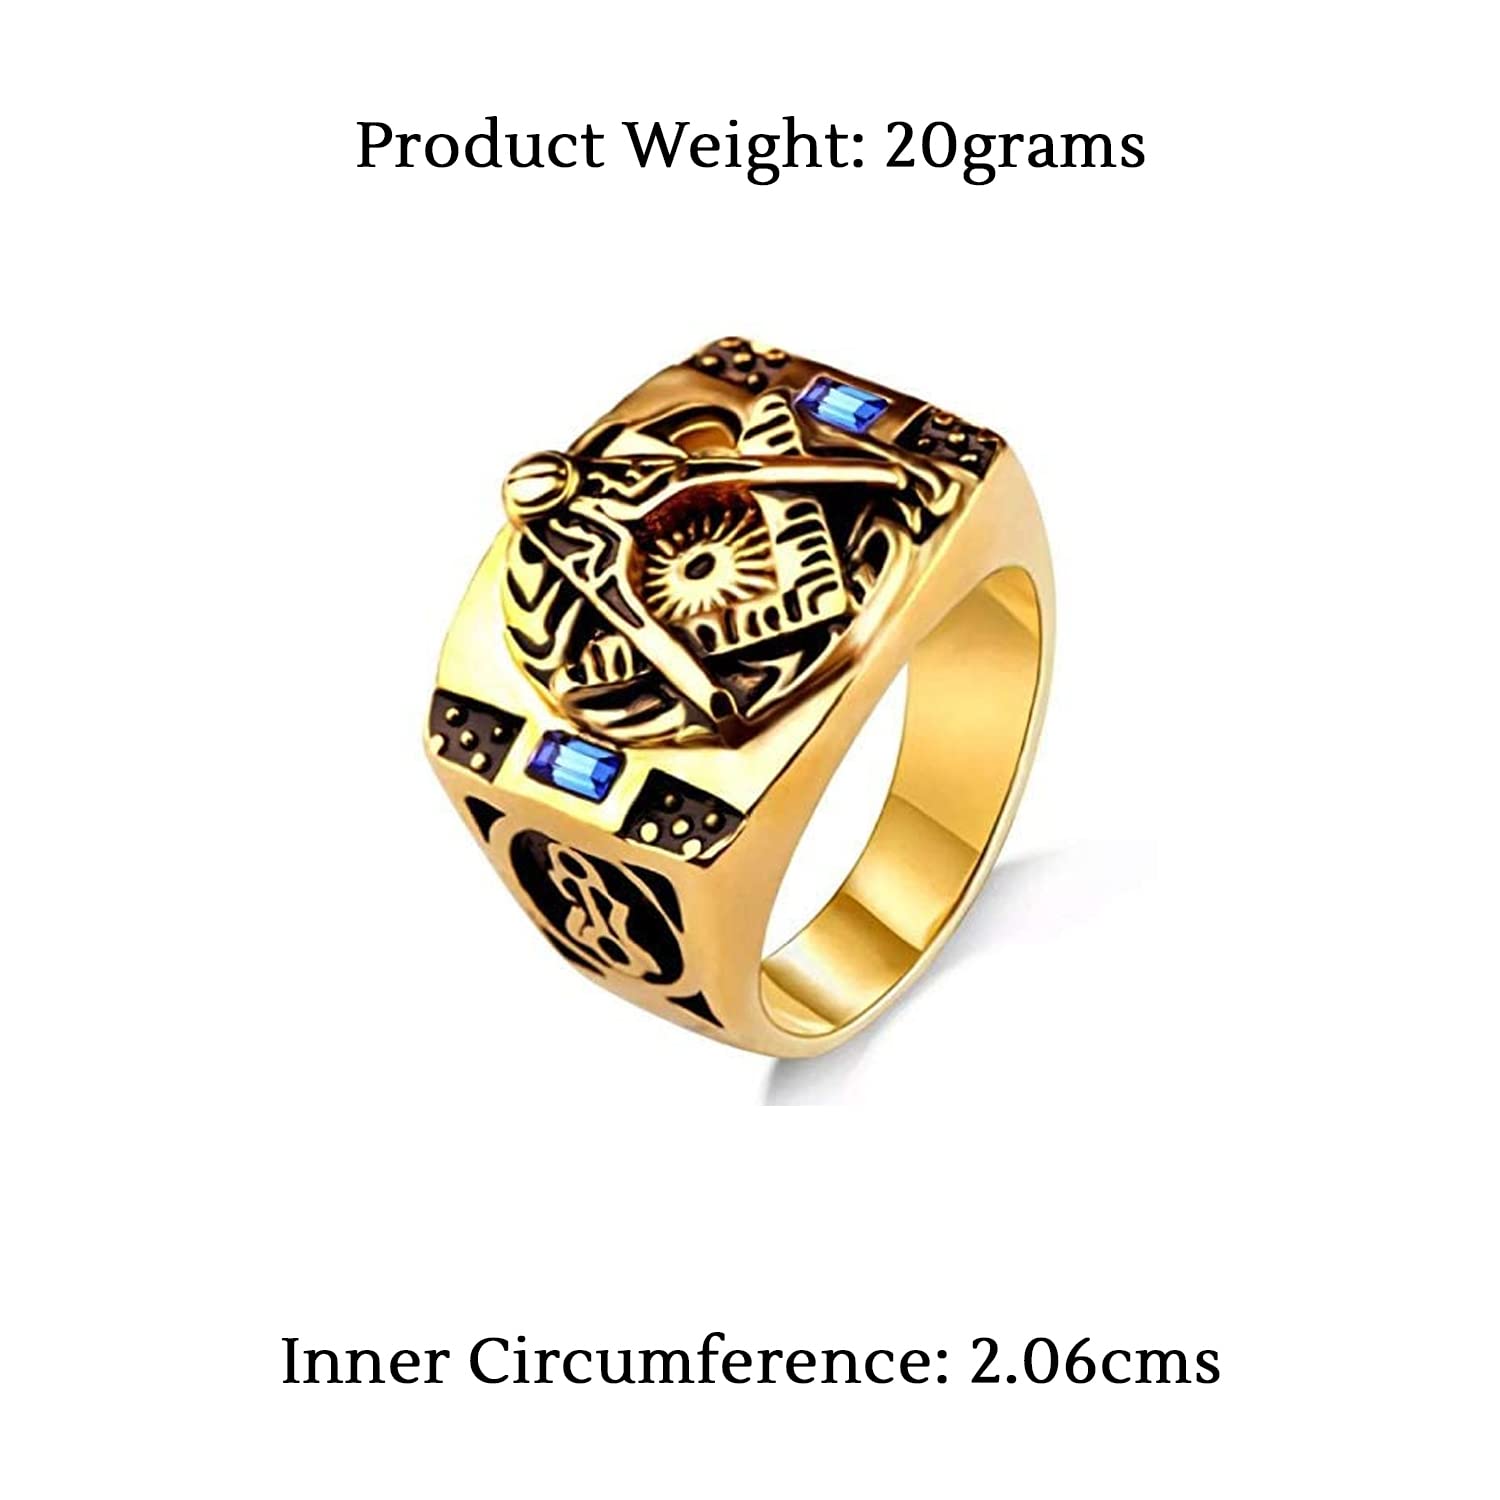 1 Gram Gold Forming Black Stone With Diamond Antique Design Ring For Men -  Style A814 at Rs 2250.00 | Stone Ring | ID: 2853035516088